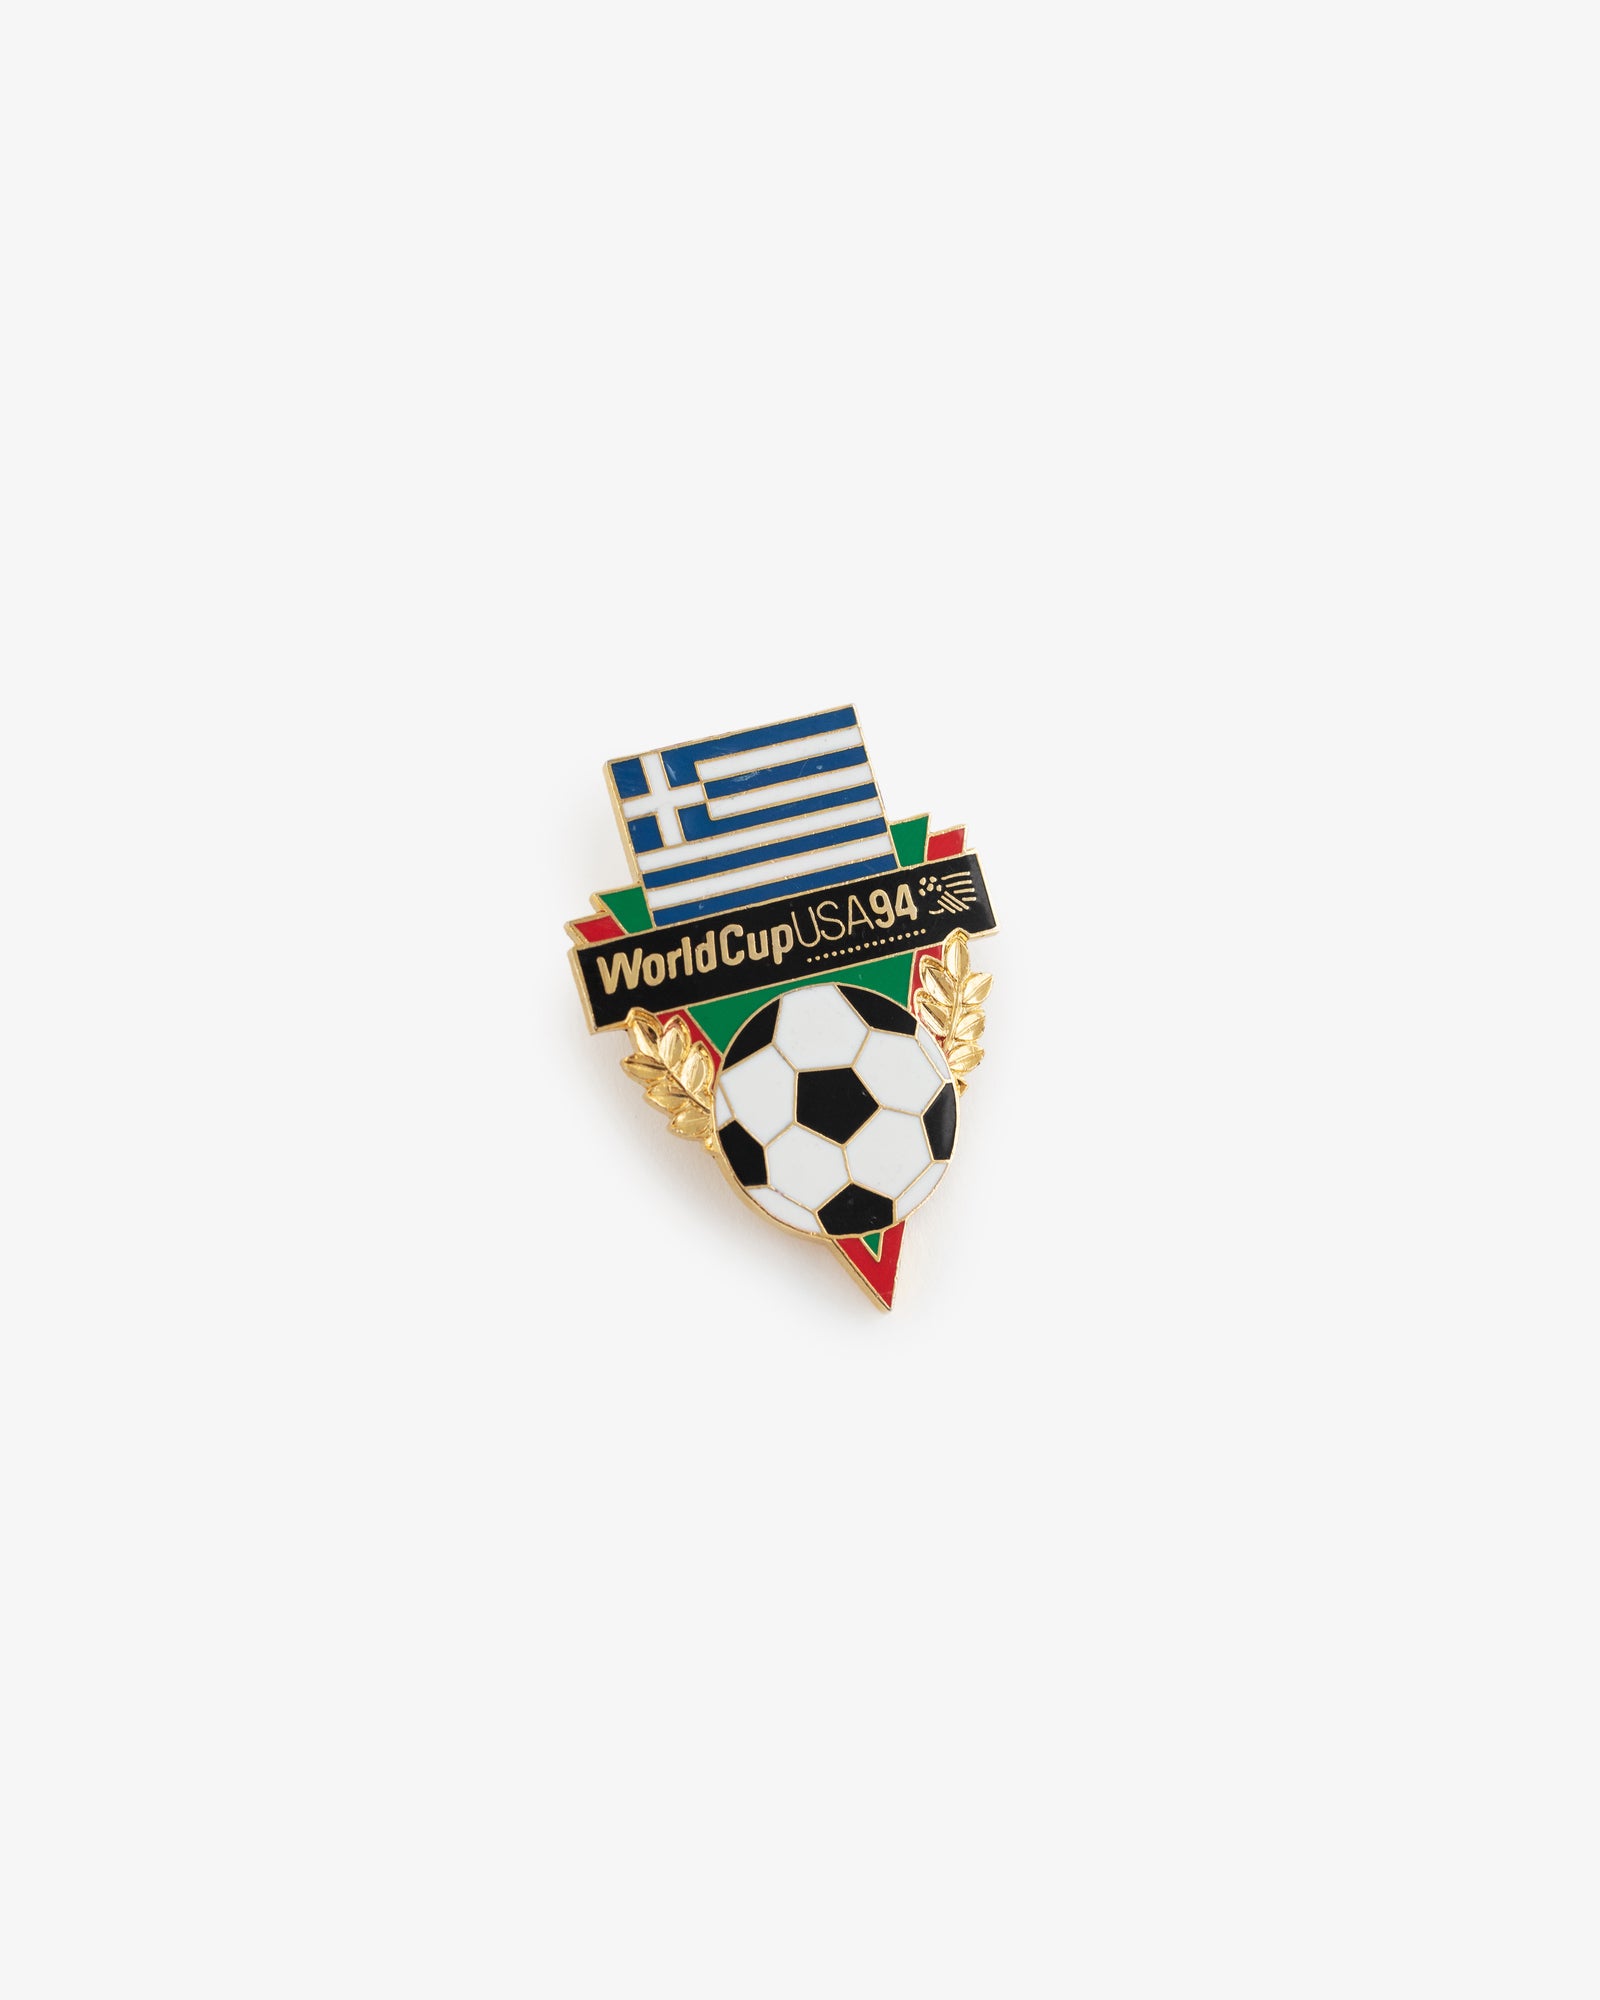 Vintage 1994 Greece World Cup Pin